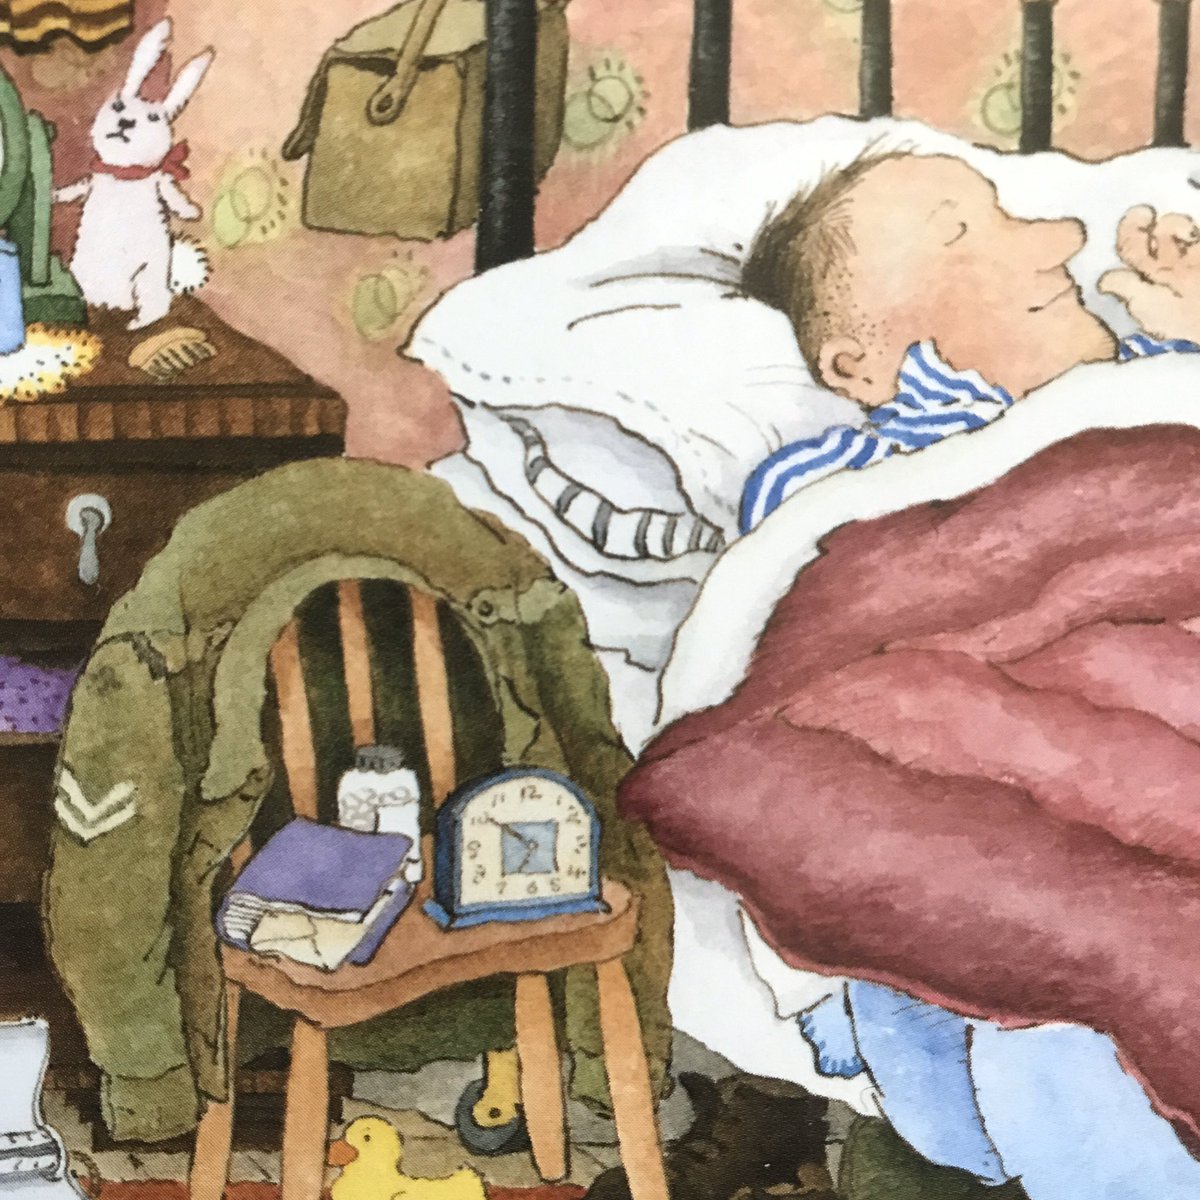 And when you snuggle down your book will be waiting for you until tomorrow, your place marked using whatever comes to hand. Sweet reading and sweet dreams (yes we keep toddler hours here). End of thread! Feel free to add your own images  #booksinchildrensbooks